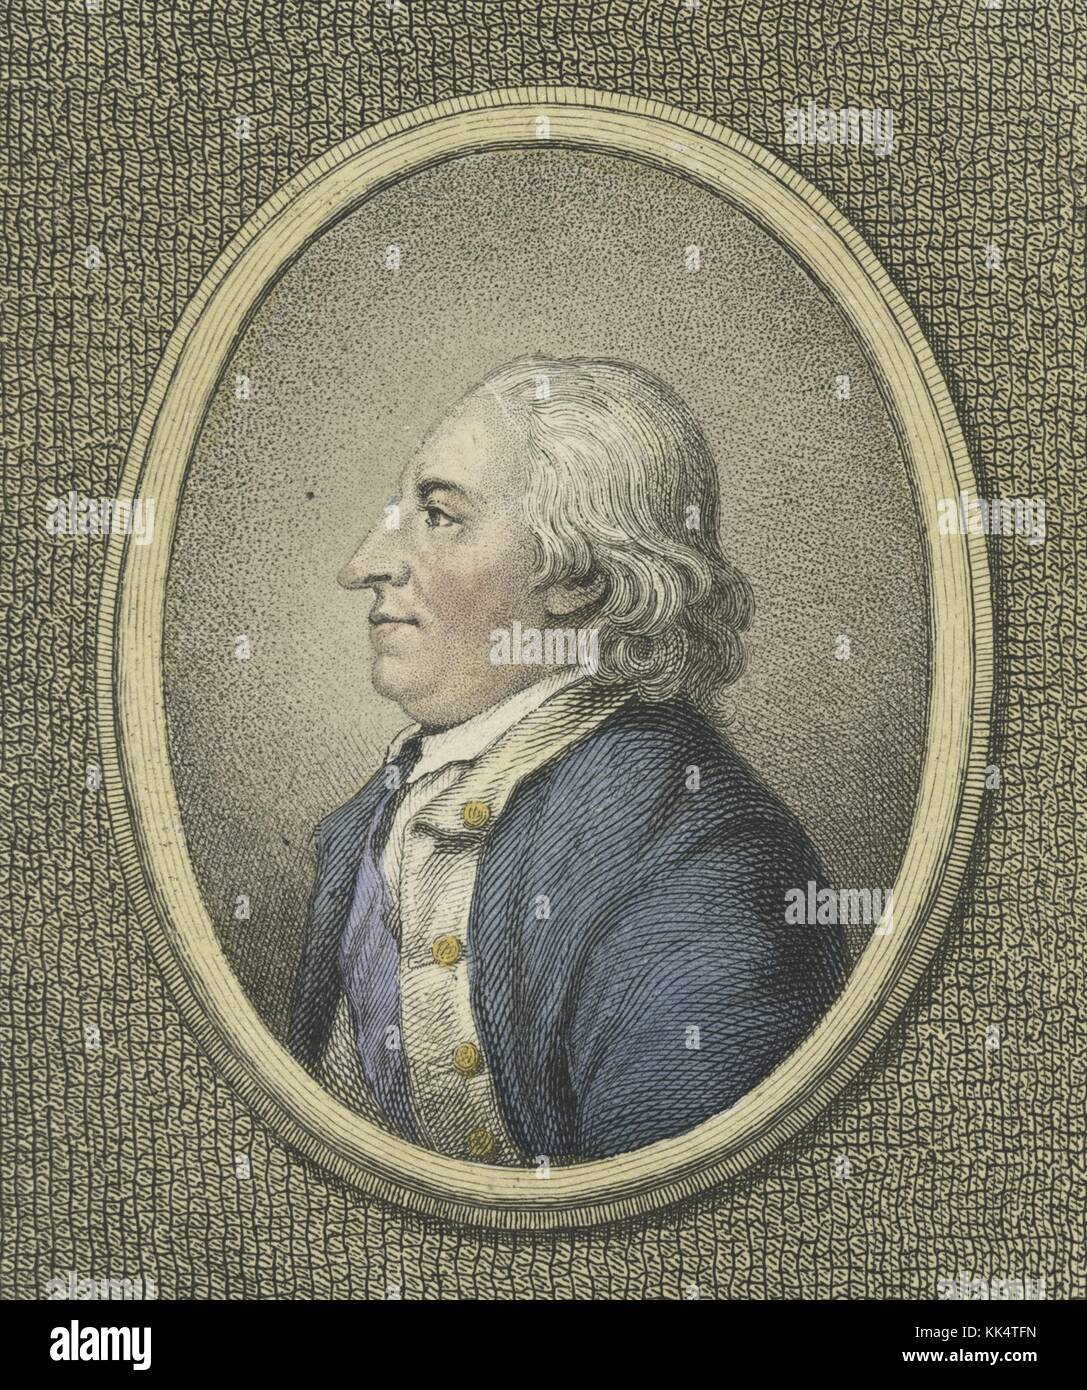 An engraving of Horatio Gates, he was a retired British soldier who served as a Major General in the American Revolutionary War, after a stalled British military career he decided to join Colonial forces and offered his support to George Washington, he is best remembered for his involvement in an attempt to removed George Washington as Commander-in-Chief during the war as well as his actions that led to the Continental Army being defeated in the Battle of Camden, Washington, DC, 1800. From the New York Public Library. Stock Photo